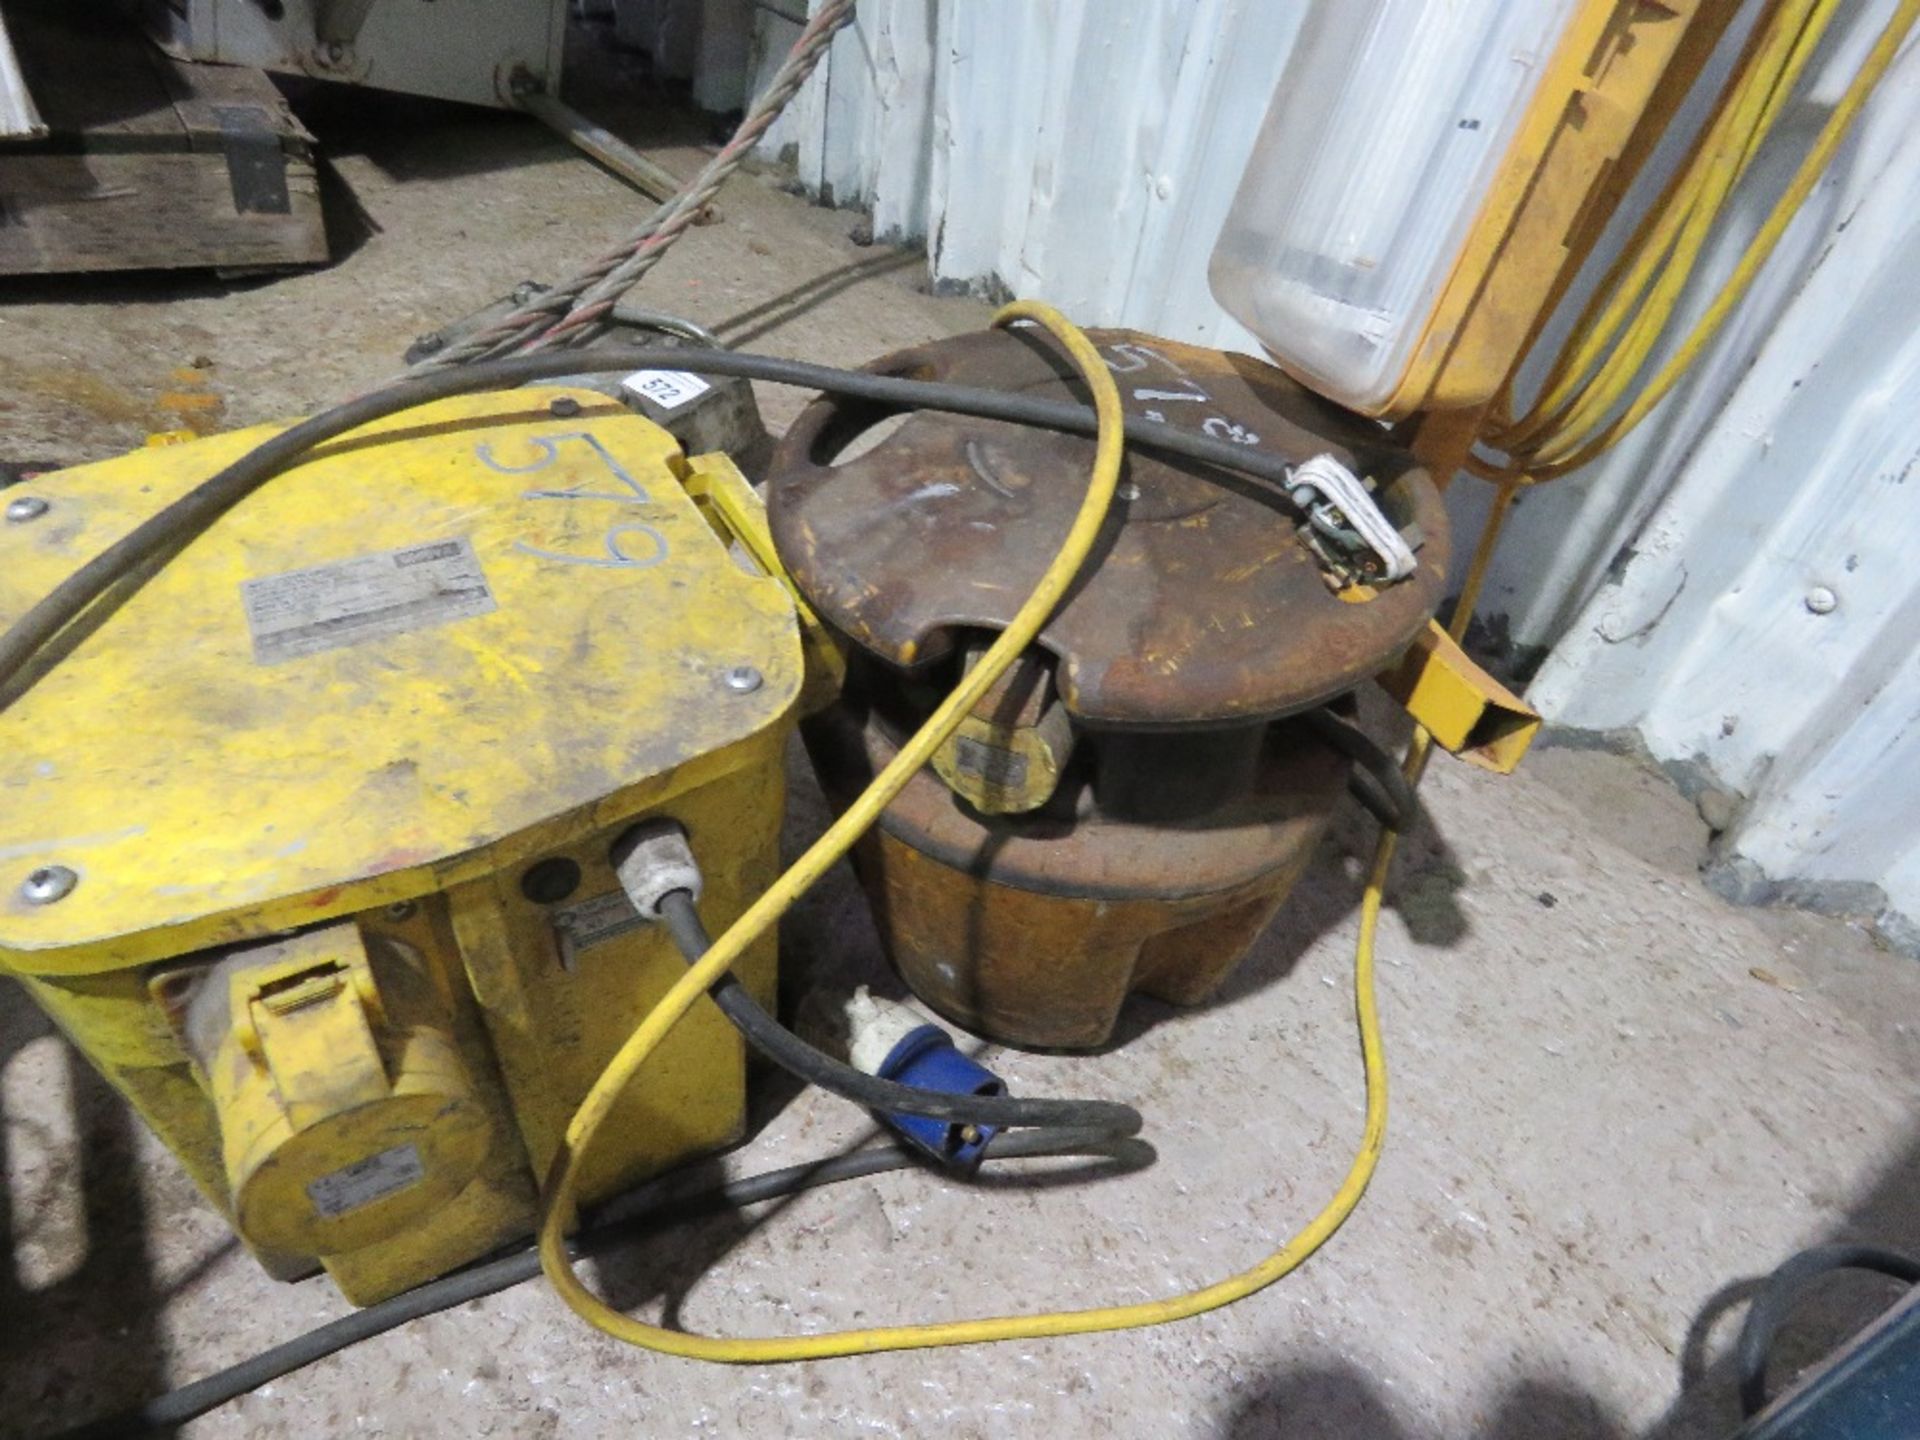 2 X TRANSFORMERS PLUS A WORK LIGHT. SOURCED FROM SITE CLOSURE/CLEARANCE. - Image 2 of 3